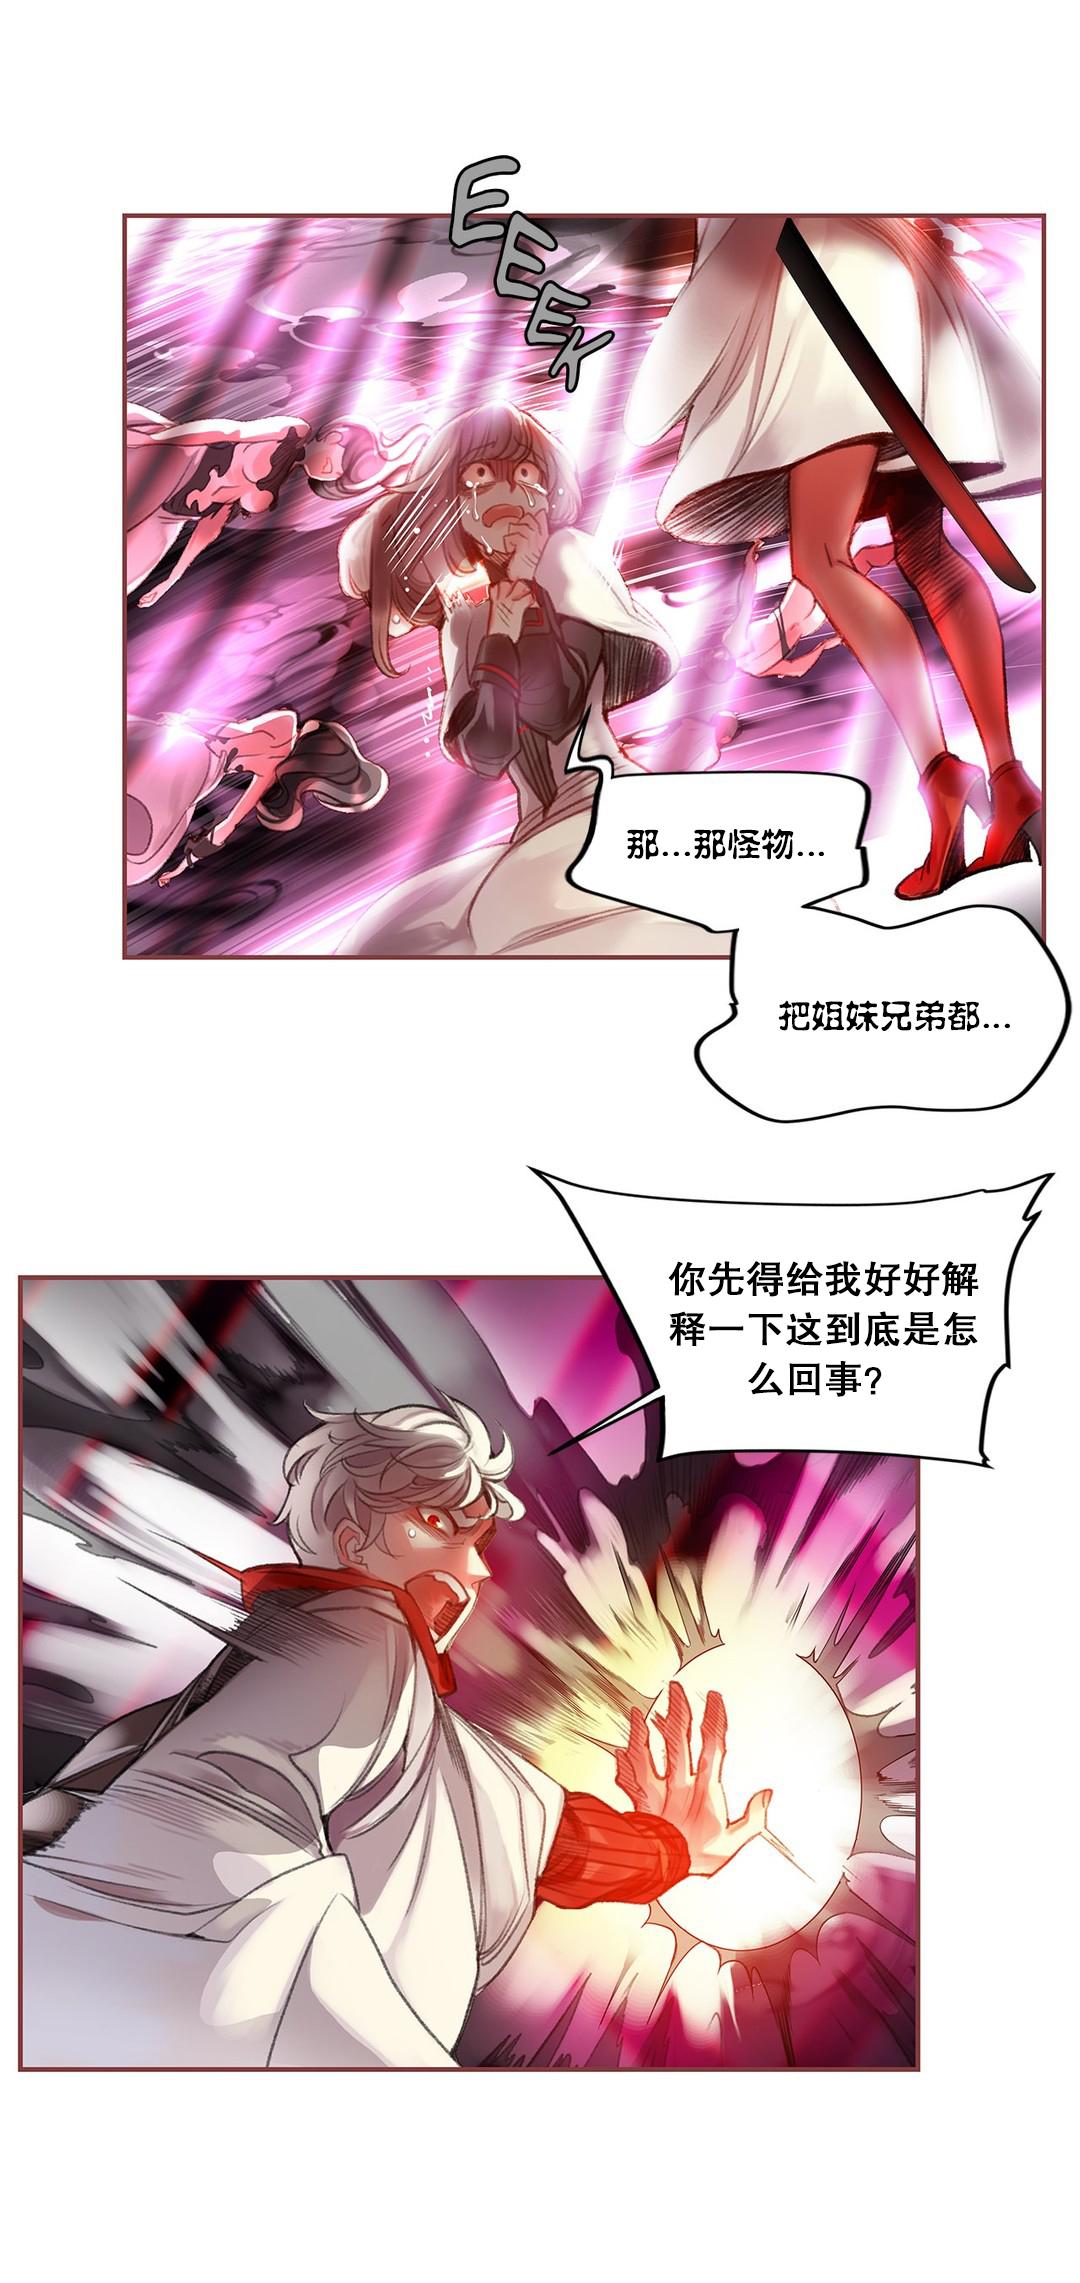 [Juder] Lilith`s Cord (第二季) Ch.61-63 [Chinese] [aaatwist个人汉化] [Ongoing] 22